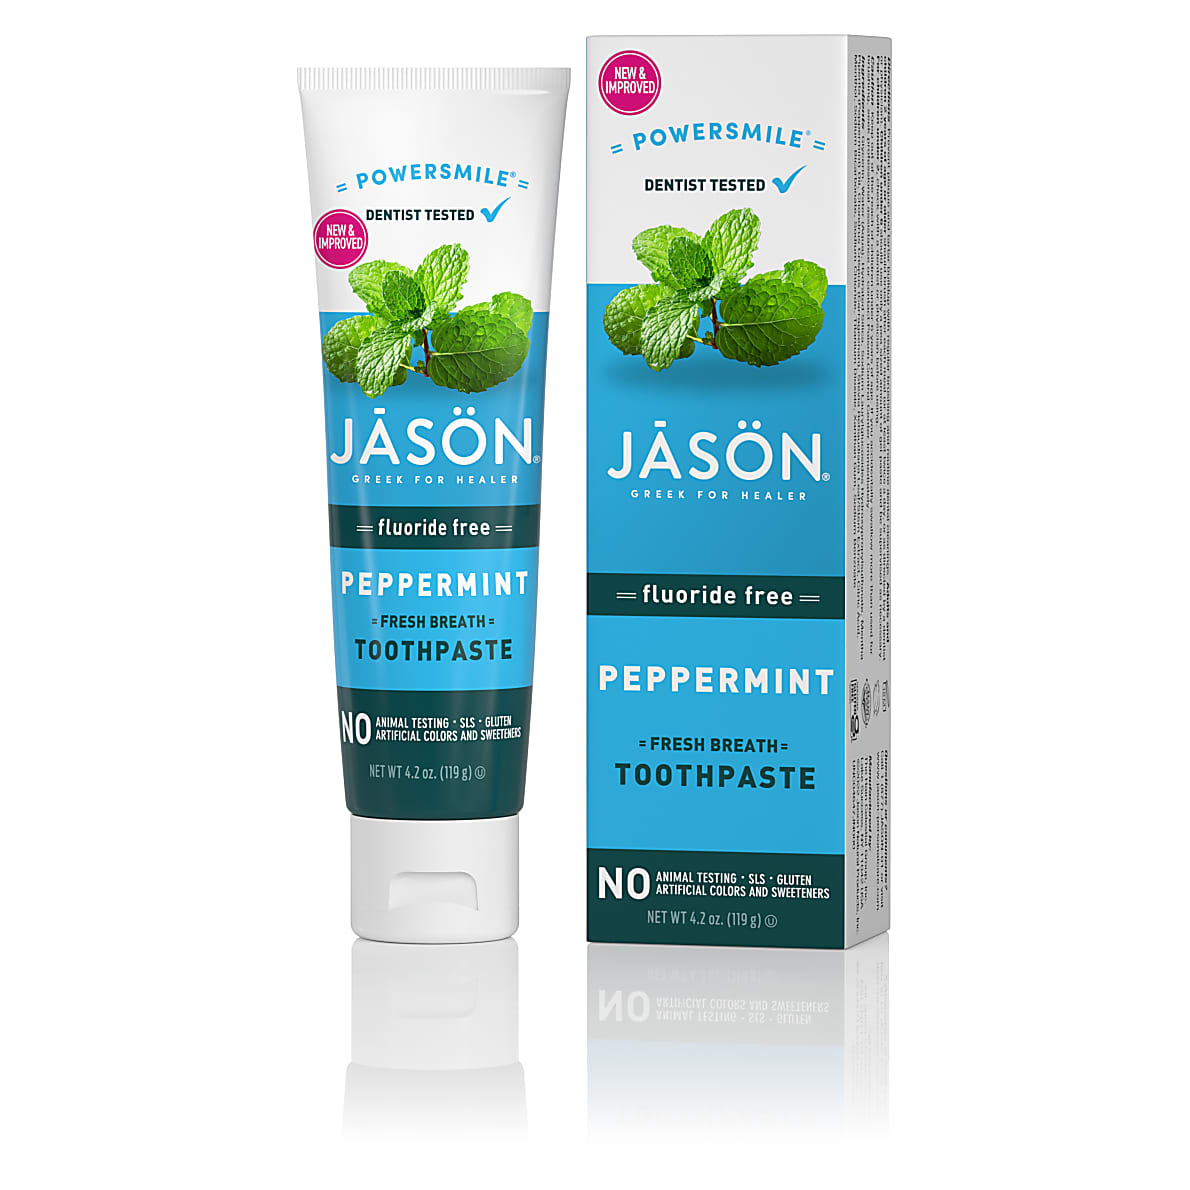 Jason Powersmile Toothpaste with Peppermint 119g ( BACK IN 2 weeks)